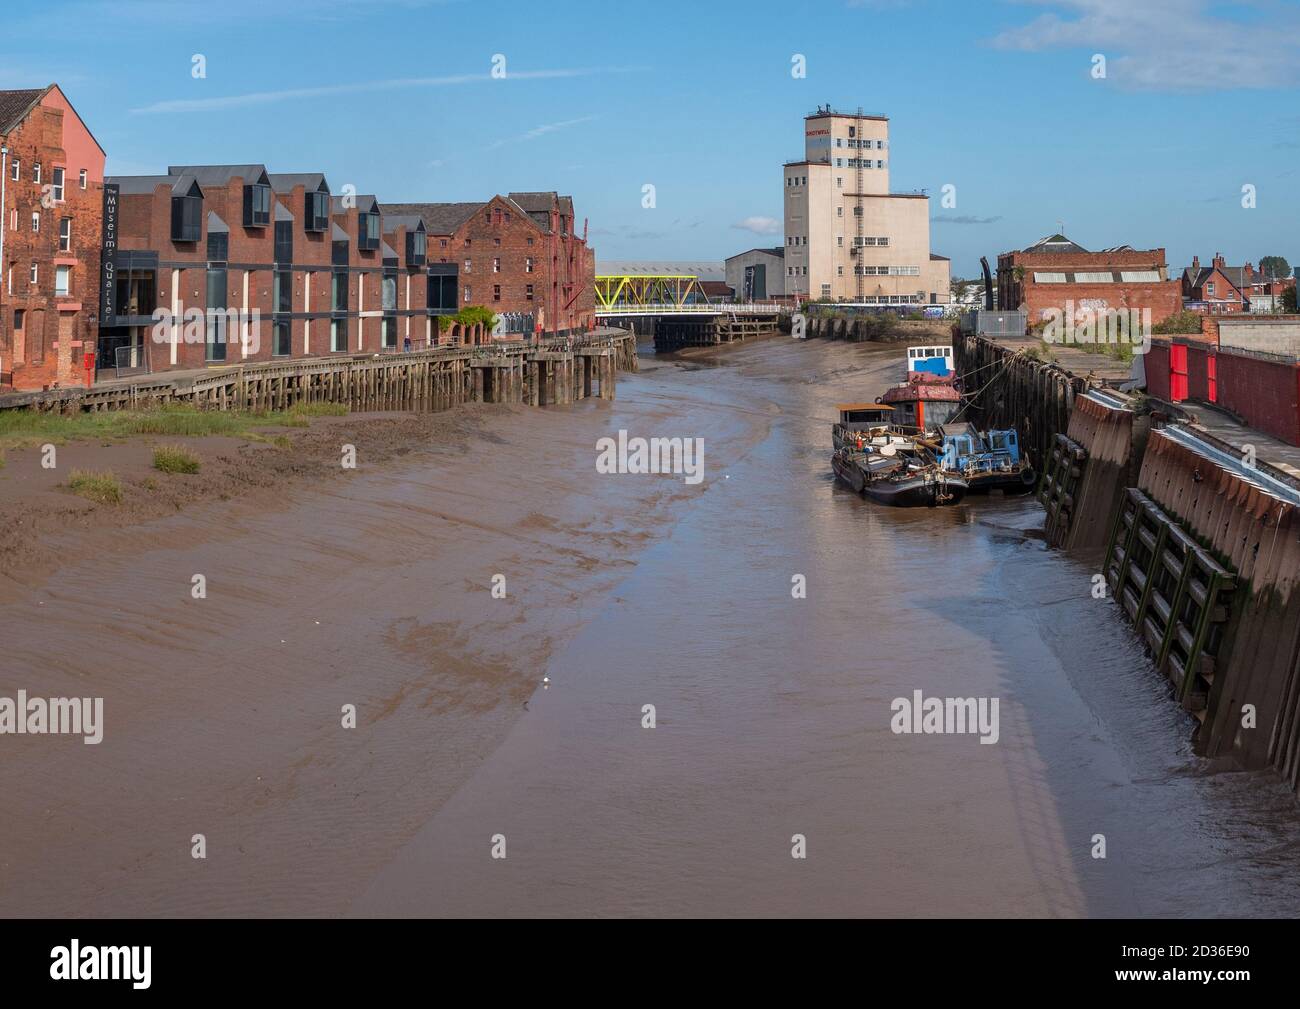 England, Humberside, Hull, 29/09/2020 - River Hull old cargo ship moored on mud at low tide. Stock Photo